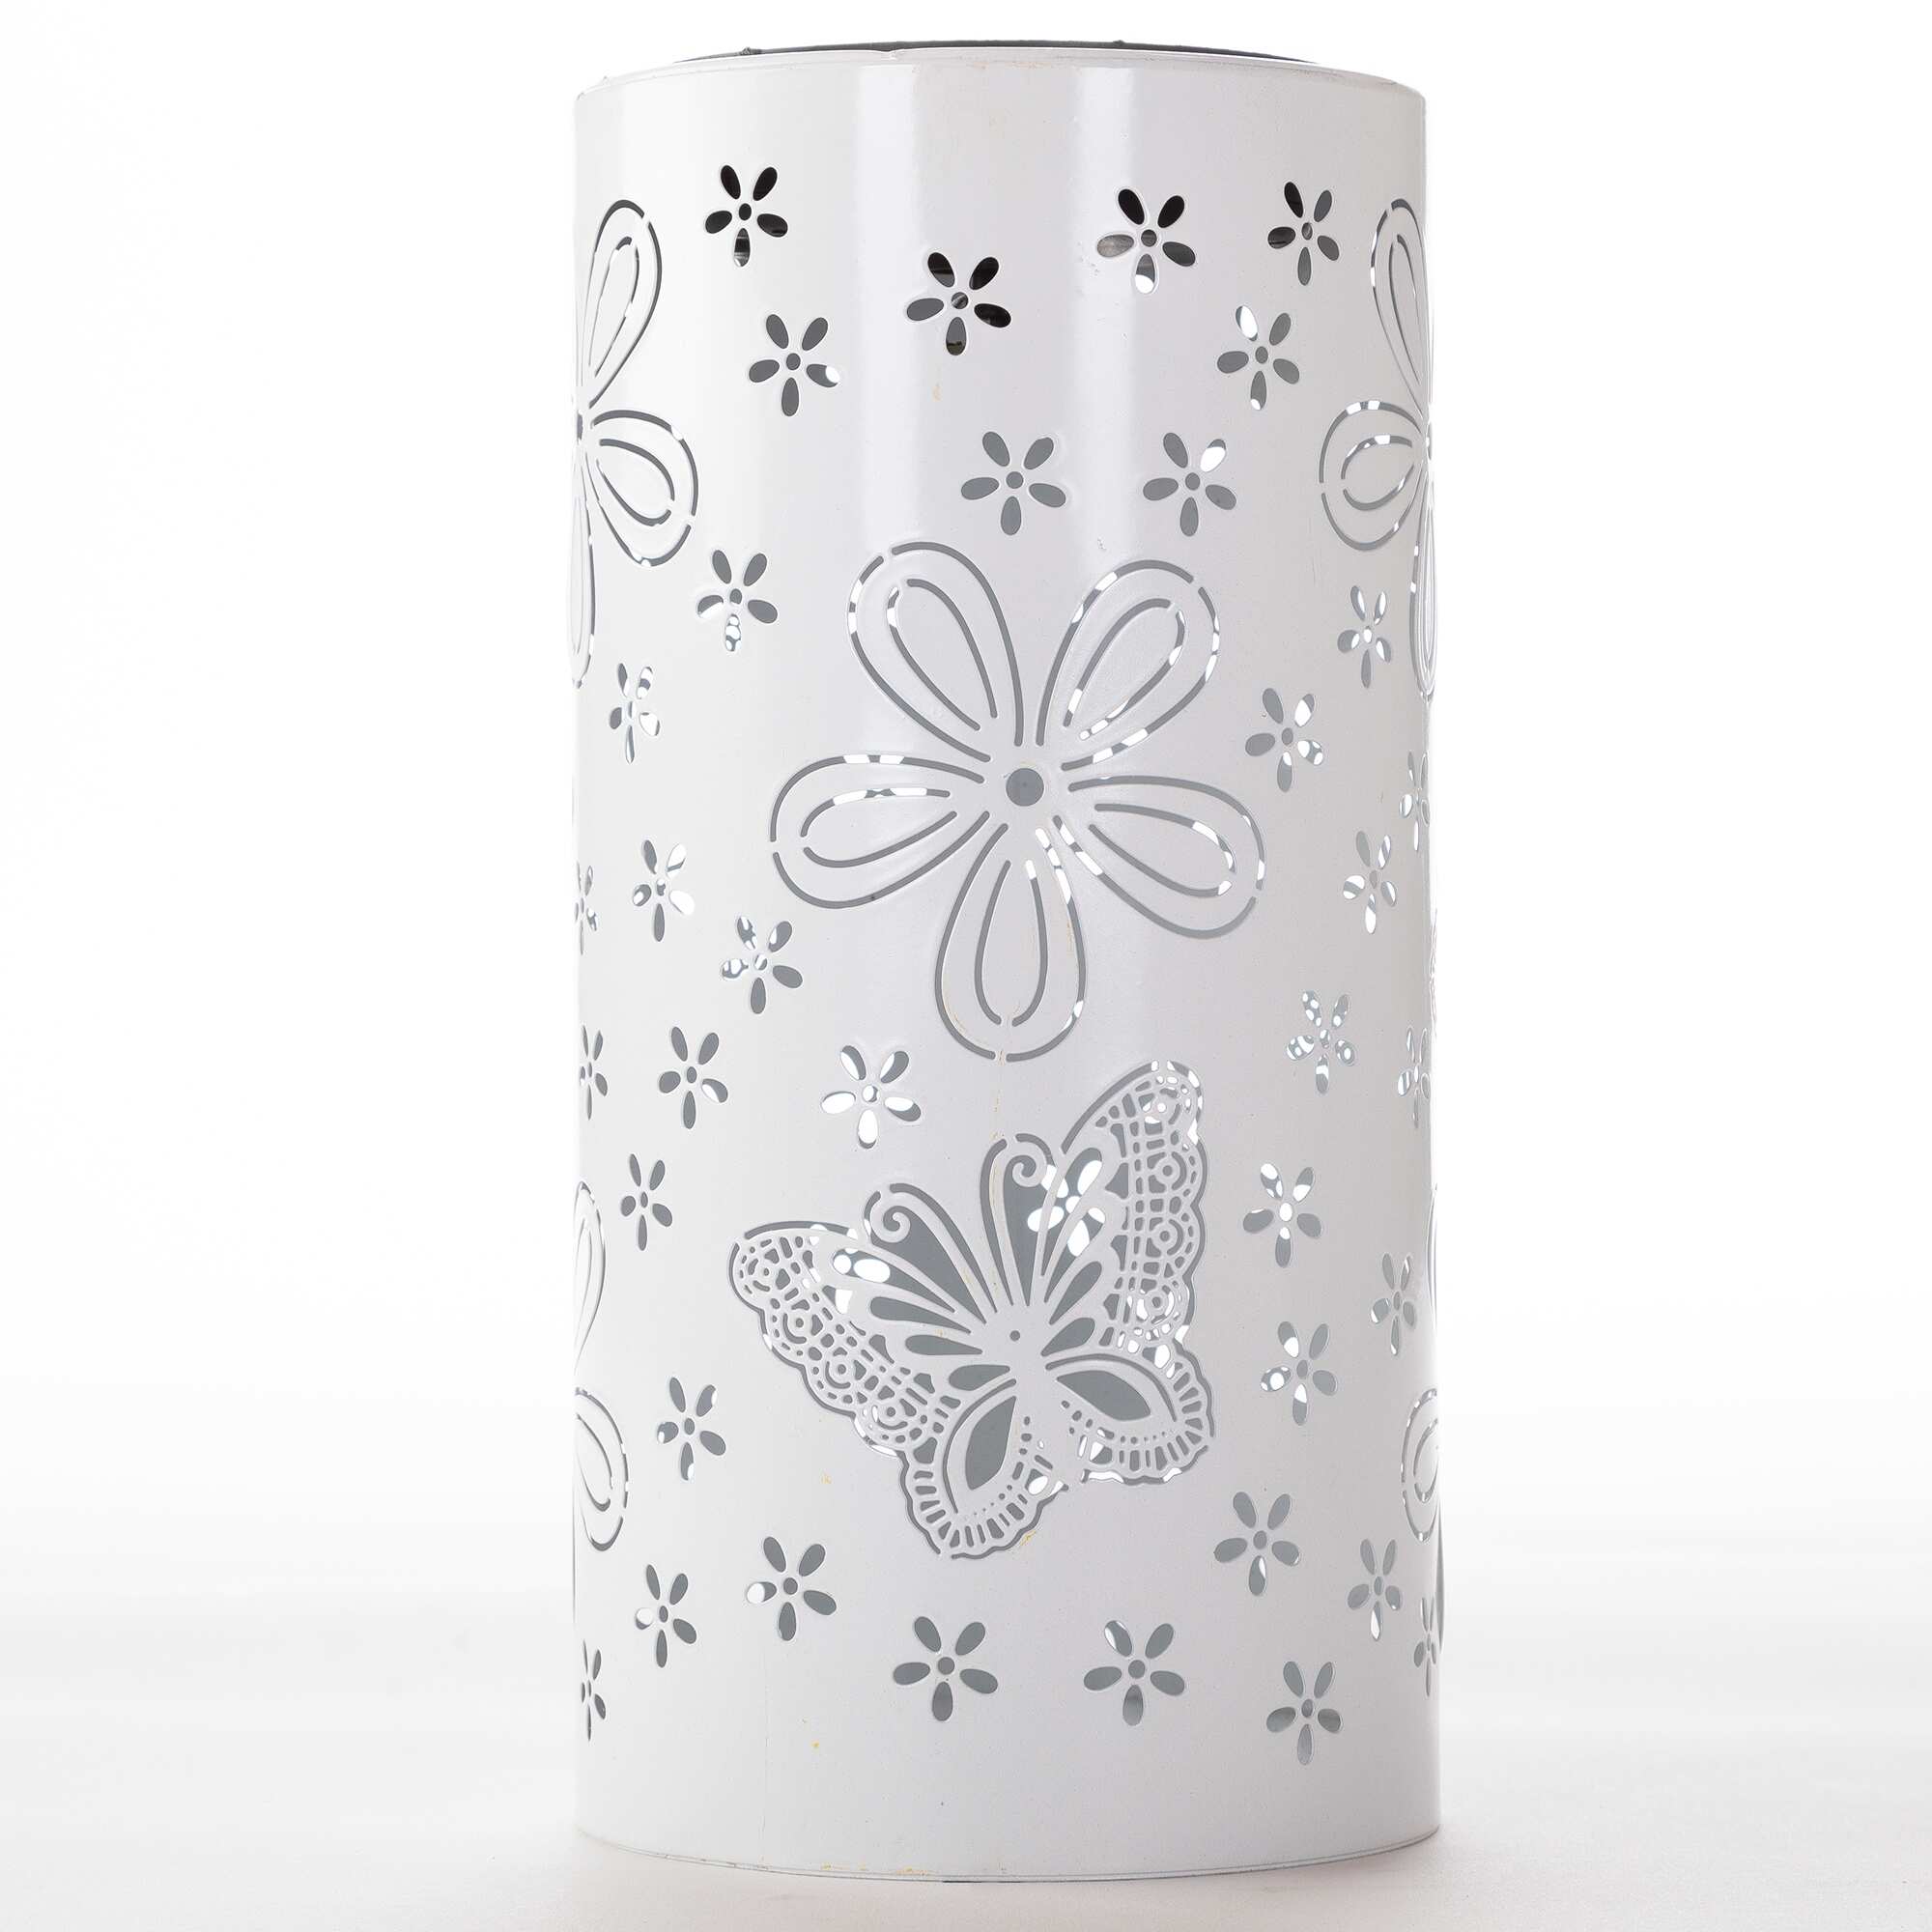 Omega Bright Designs Butterfly and Flower Morphing Color and Motion Projection Lantern